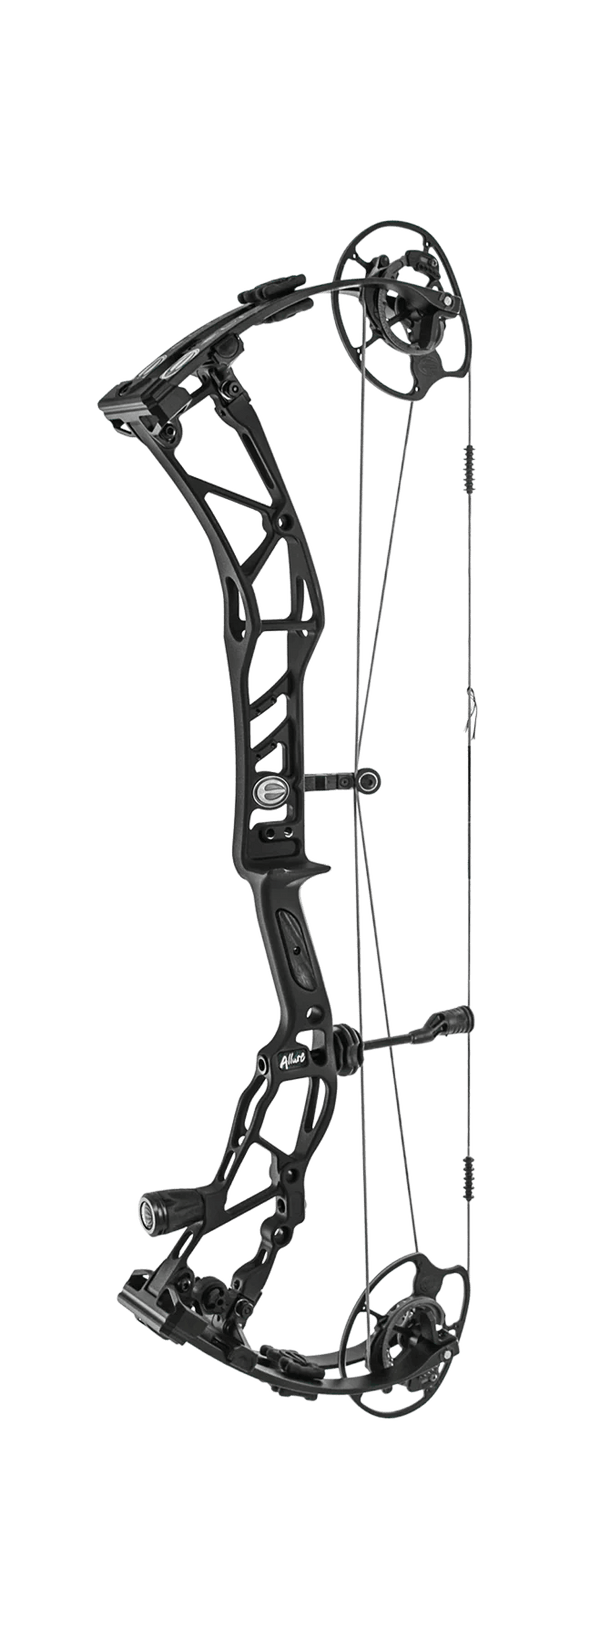 Elite Archery Allure Compound Bow - Leapfrog Outdoor Sports and Apparel